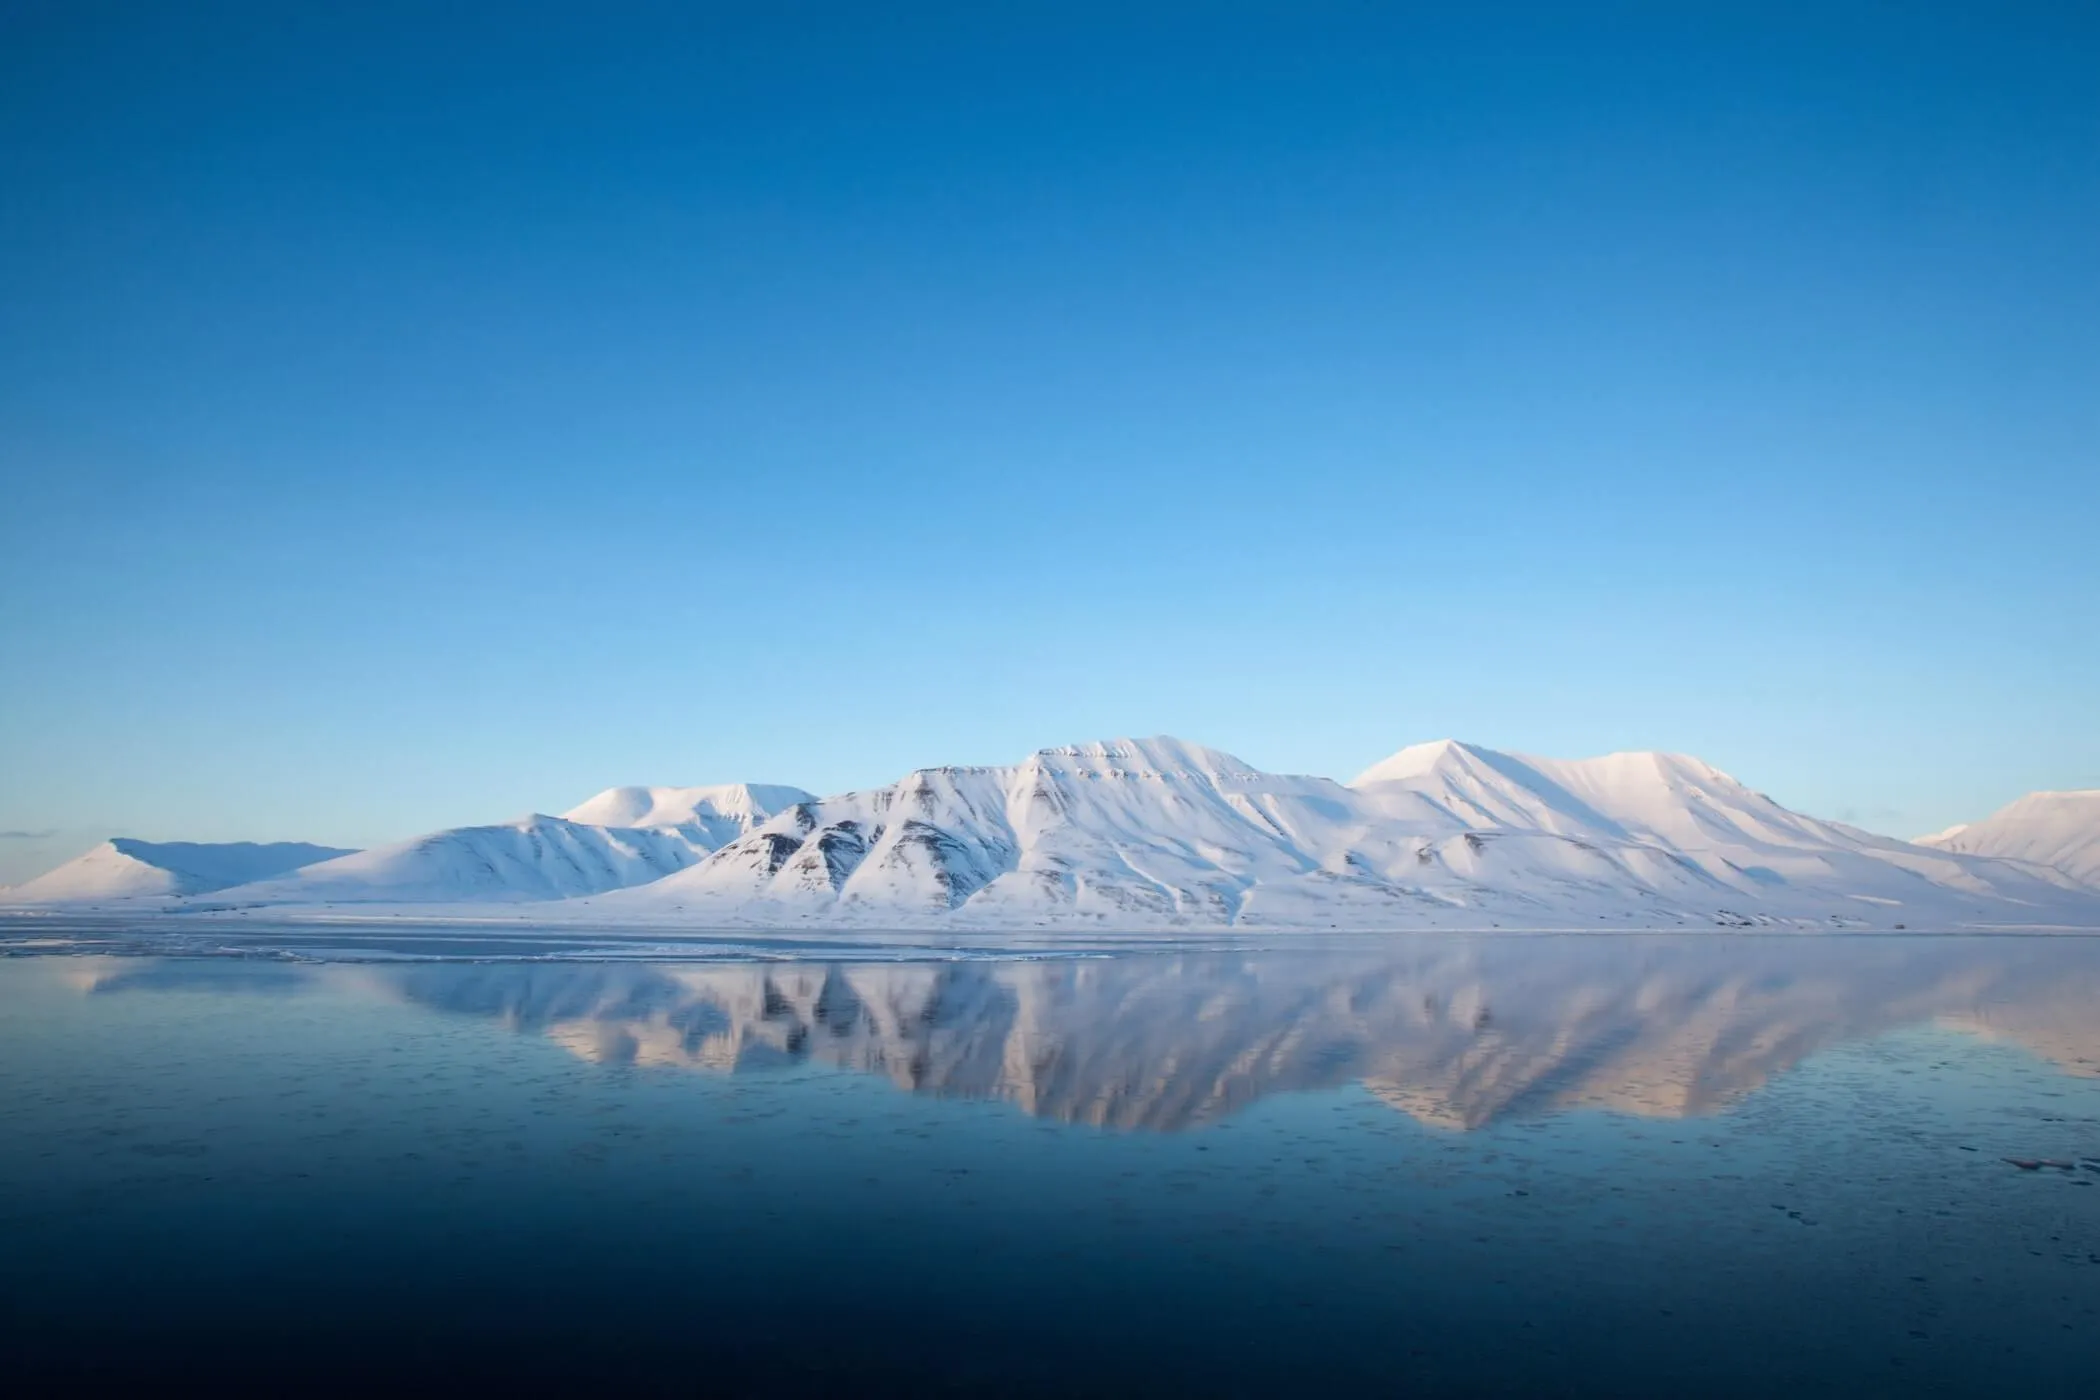 Svalbard mountains above the blue ocean.